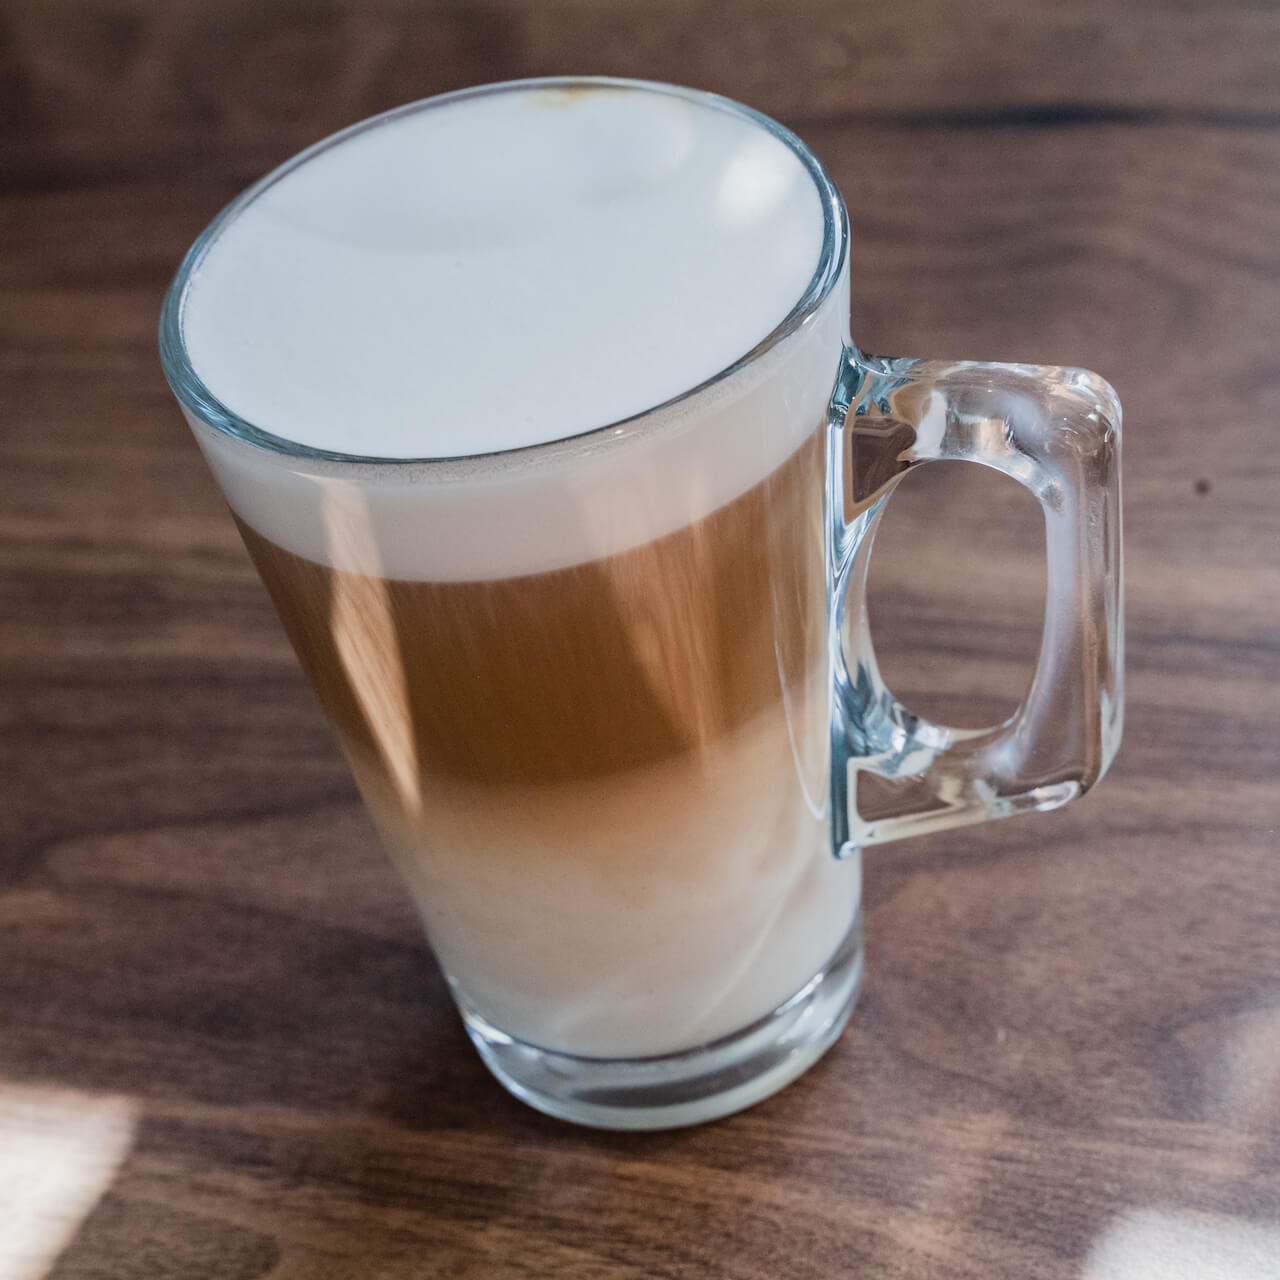 Stevig baden Populair Article - Latte, Caffe Latte, Latte Macchiato, Cappuccino... what does it  all mean?